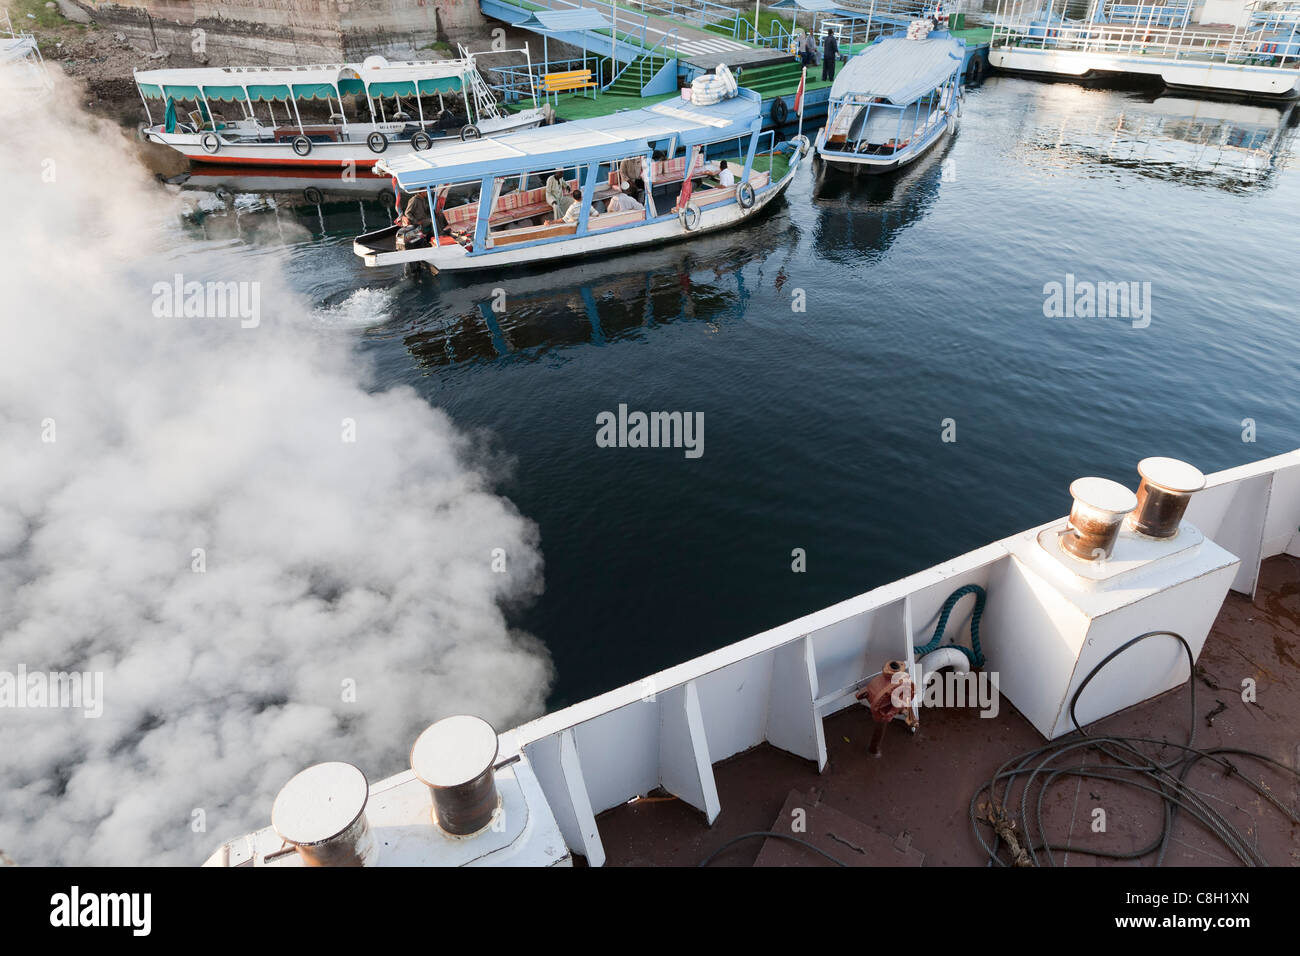 Looking down on the deck of a ship as it vents steam leaving harbour with water taxis in the distance, river Nile, Egypt Stock Photo